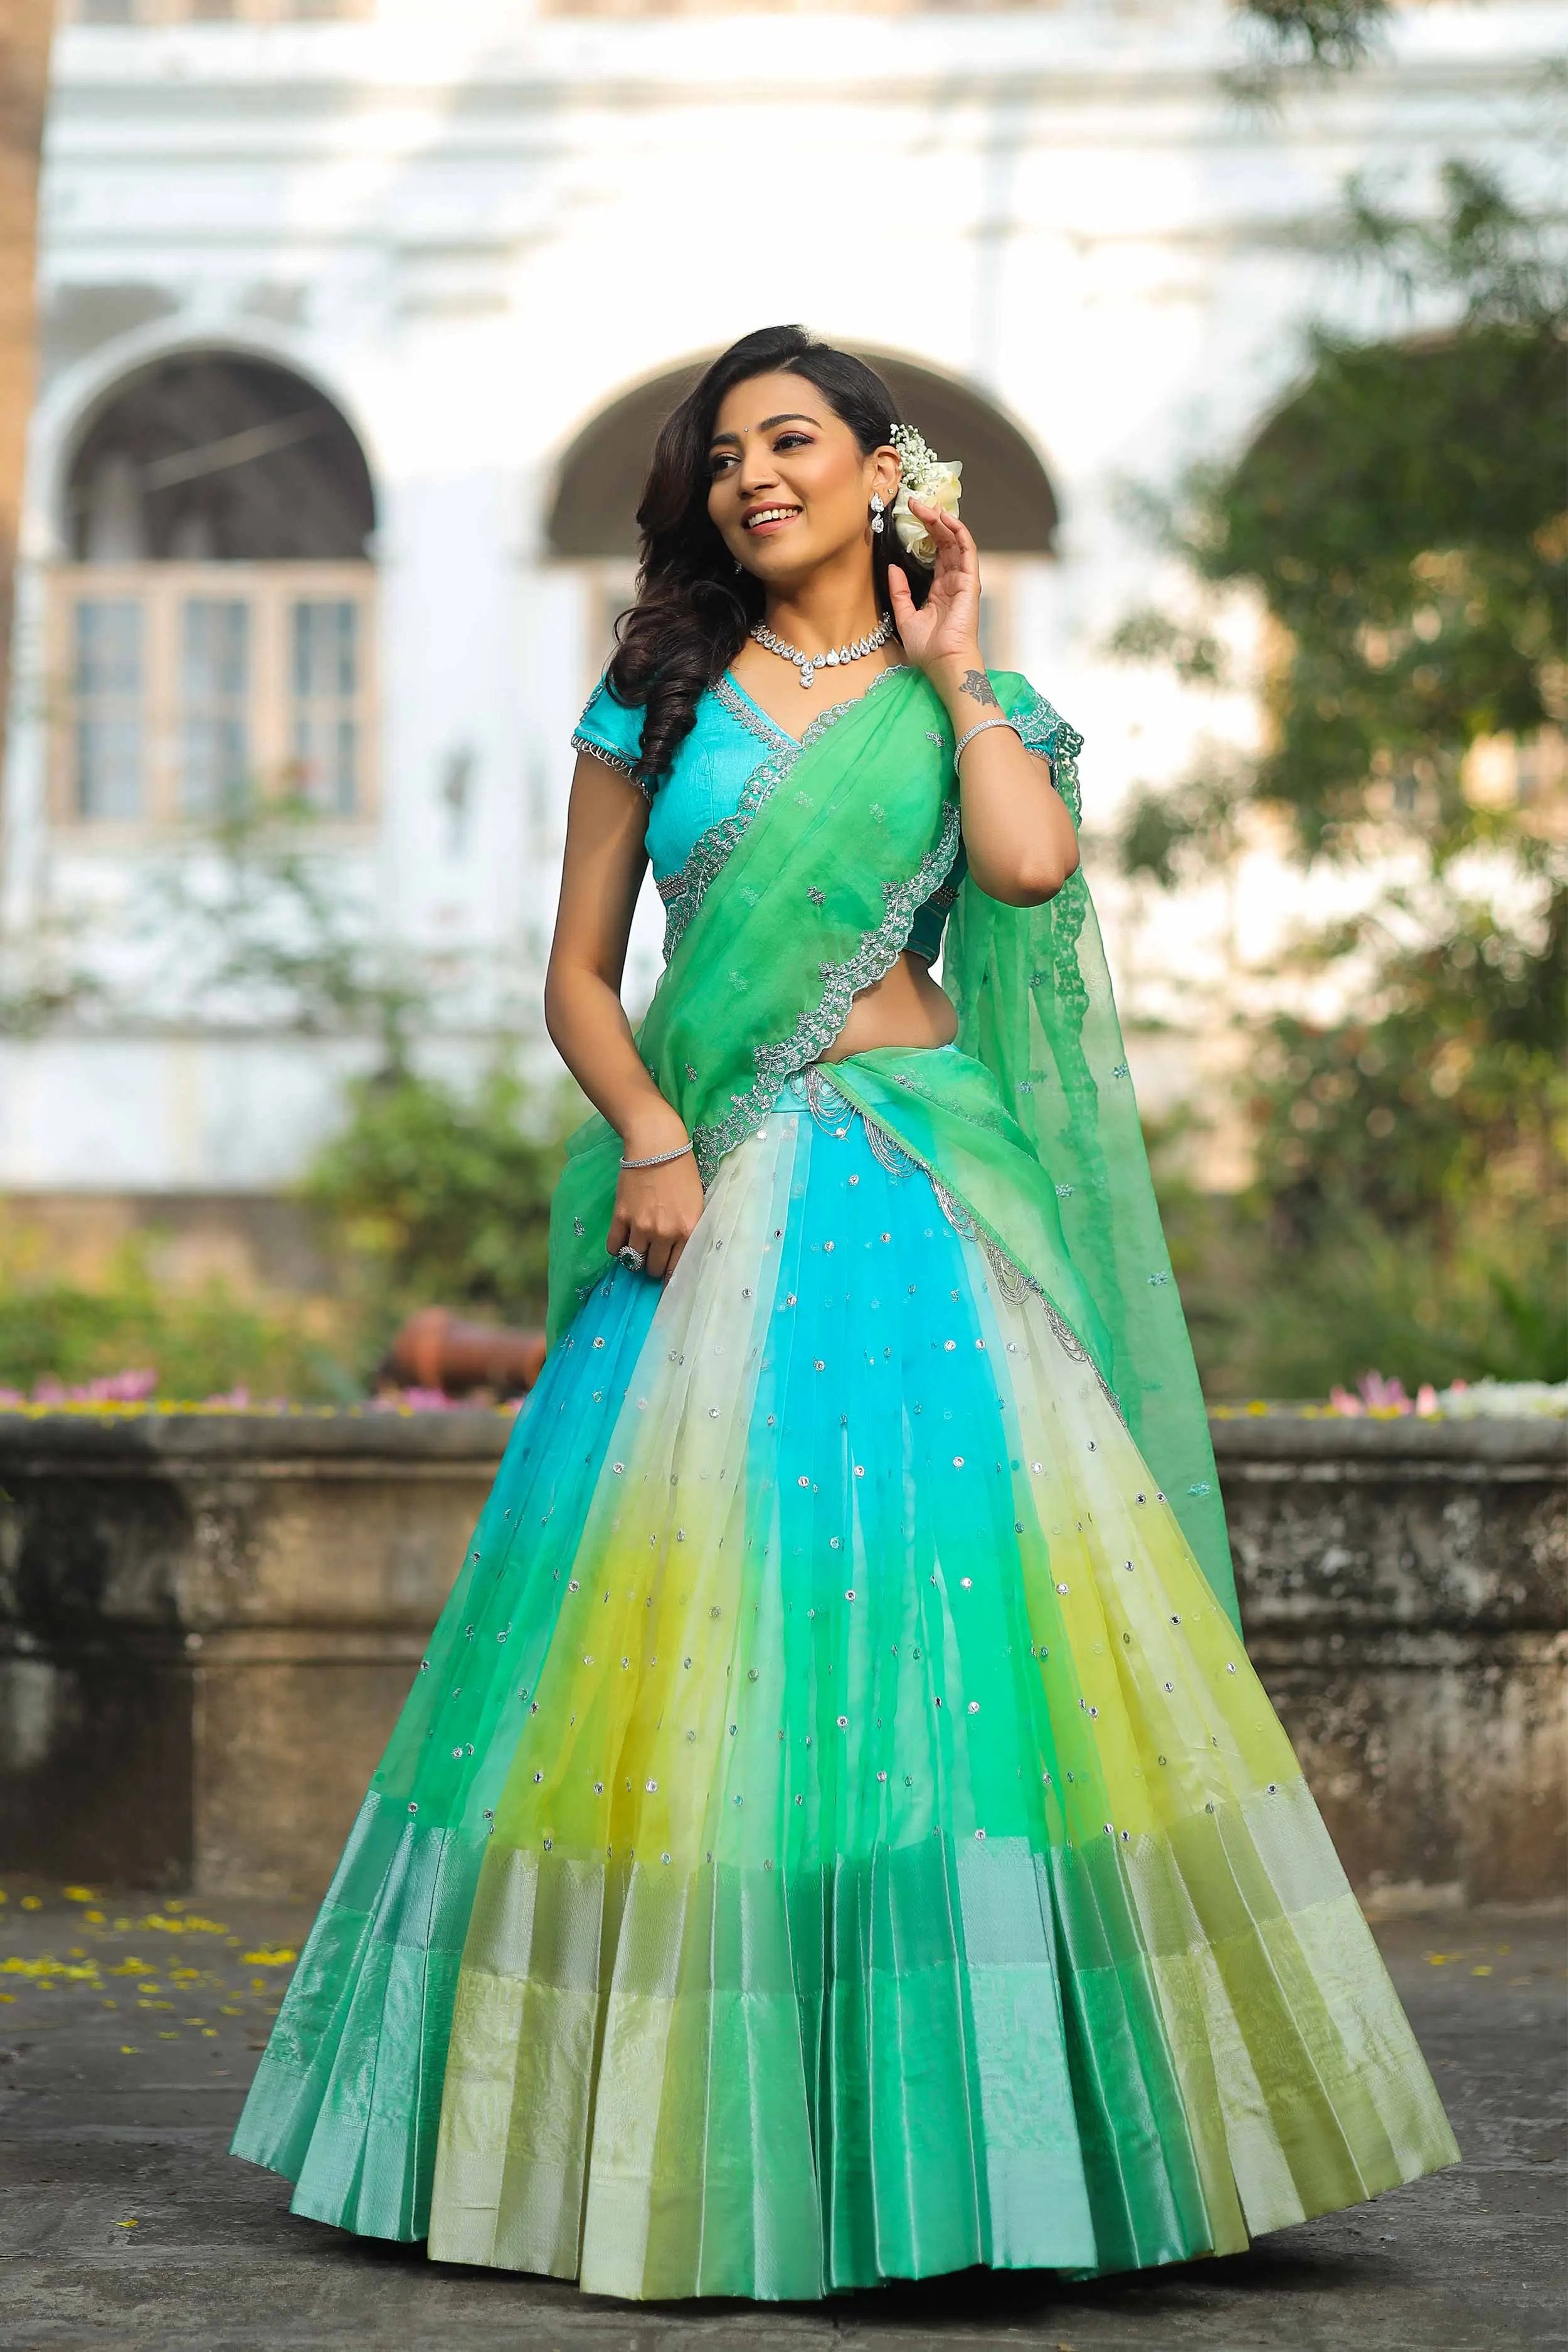 a woman in a green and blue lehenga